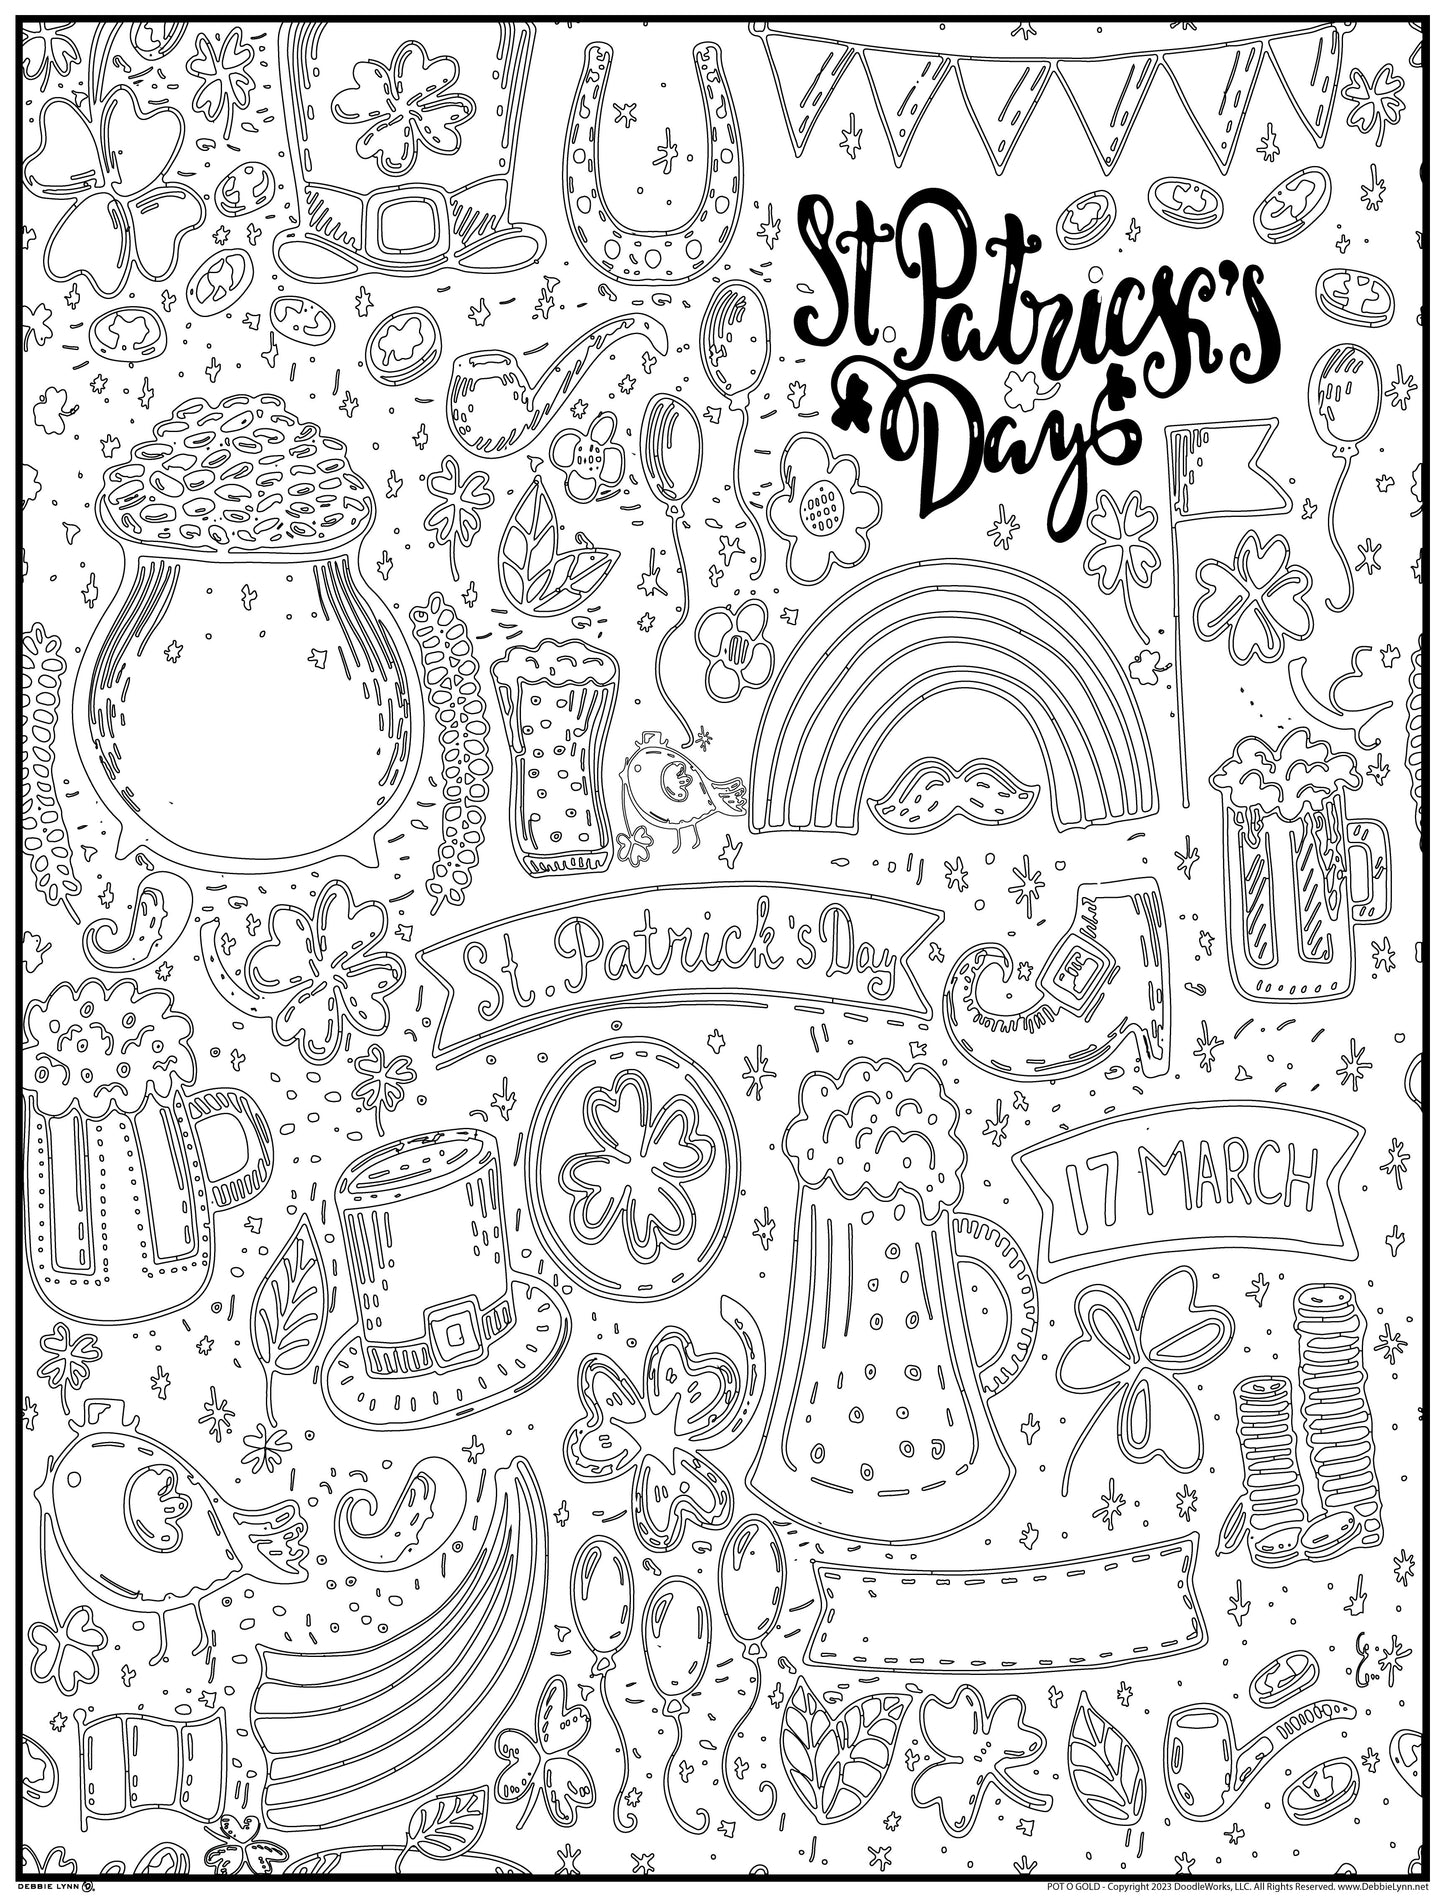 Pot O' Gold Personalized Giant Coloring Poster 46"x60"